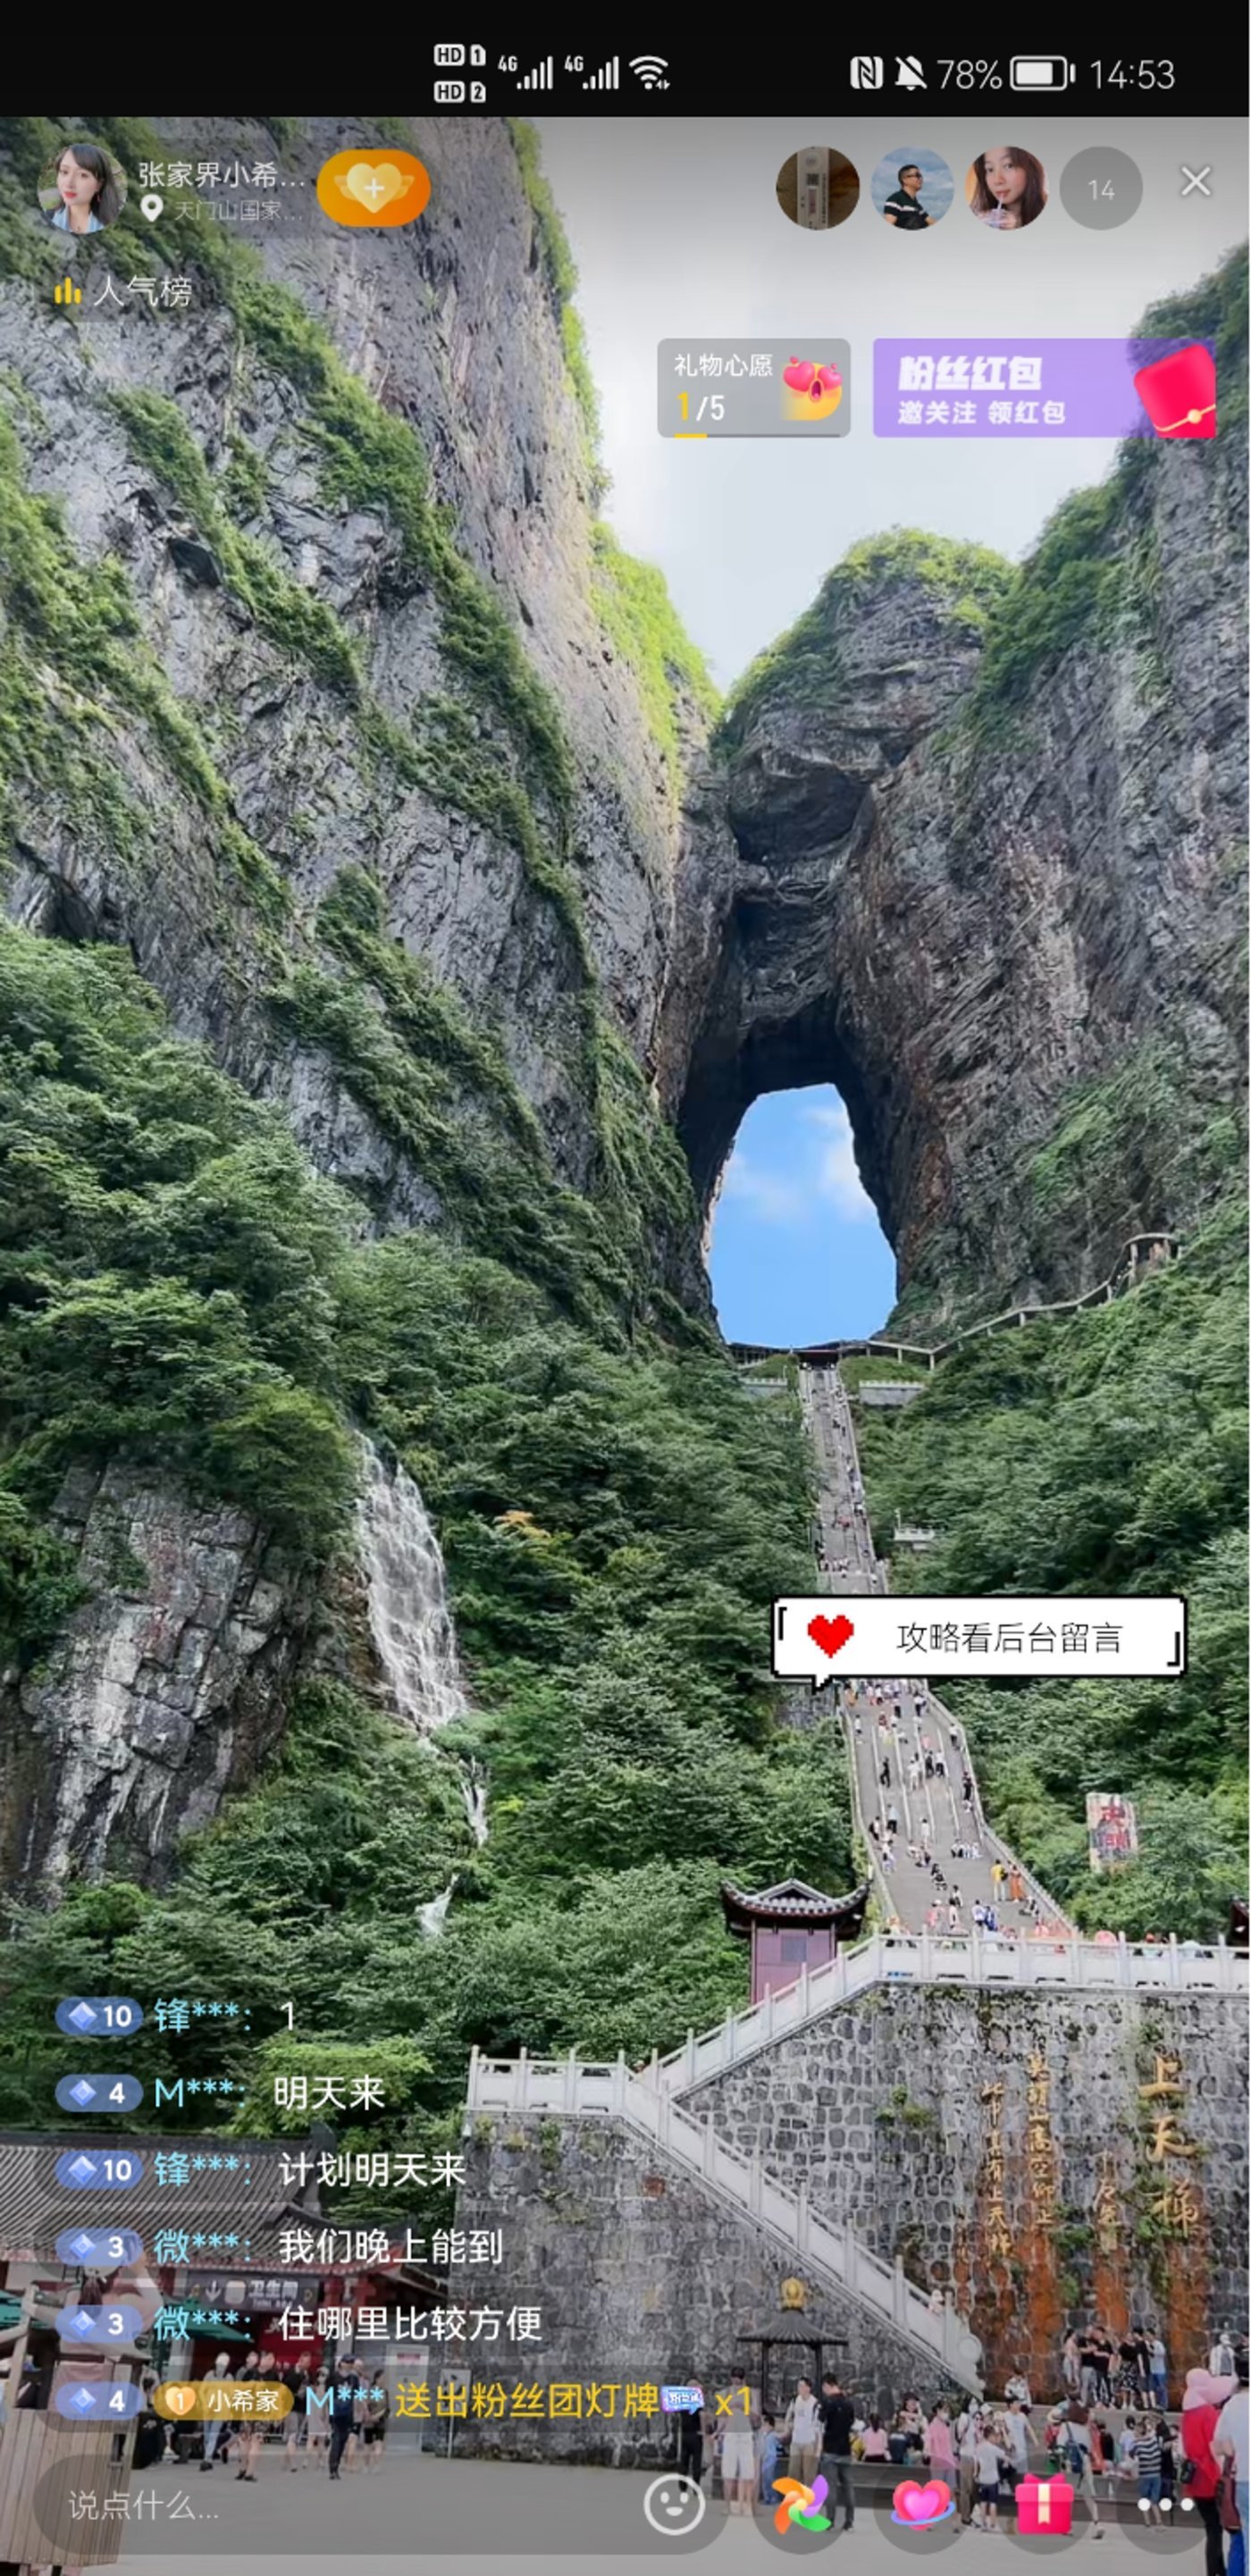 Xiaoxi, a tour guide with eight years of experience, was live-streaming in Zhangjiajie, a tourist attraction where sci-fi movie Avatar was filmed.